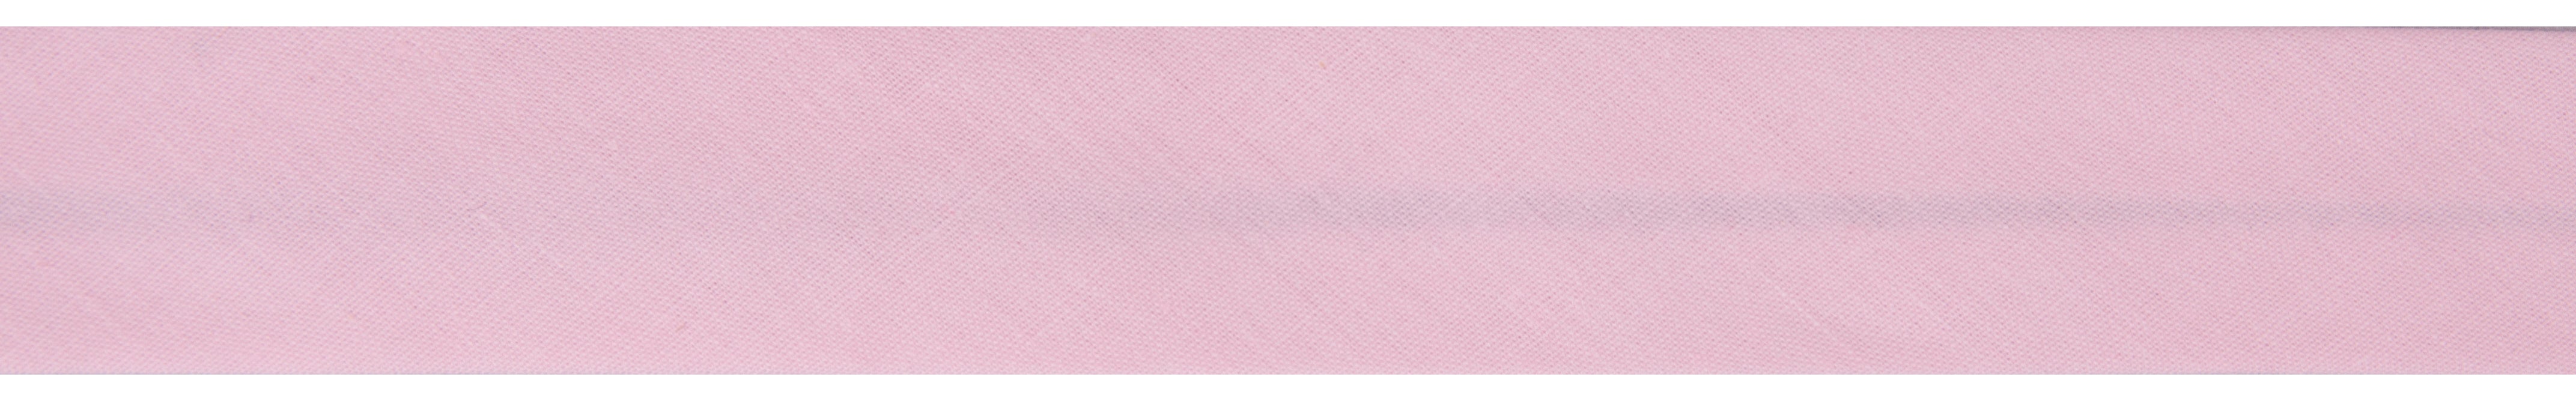 20m roll of Pink Bias Binding | 25mm width from Jaycotts Sewing Supplies